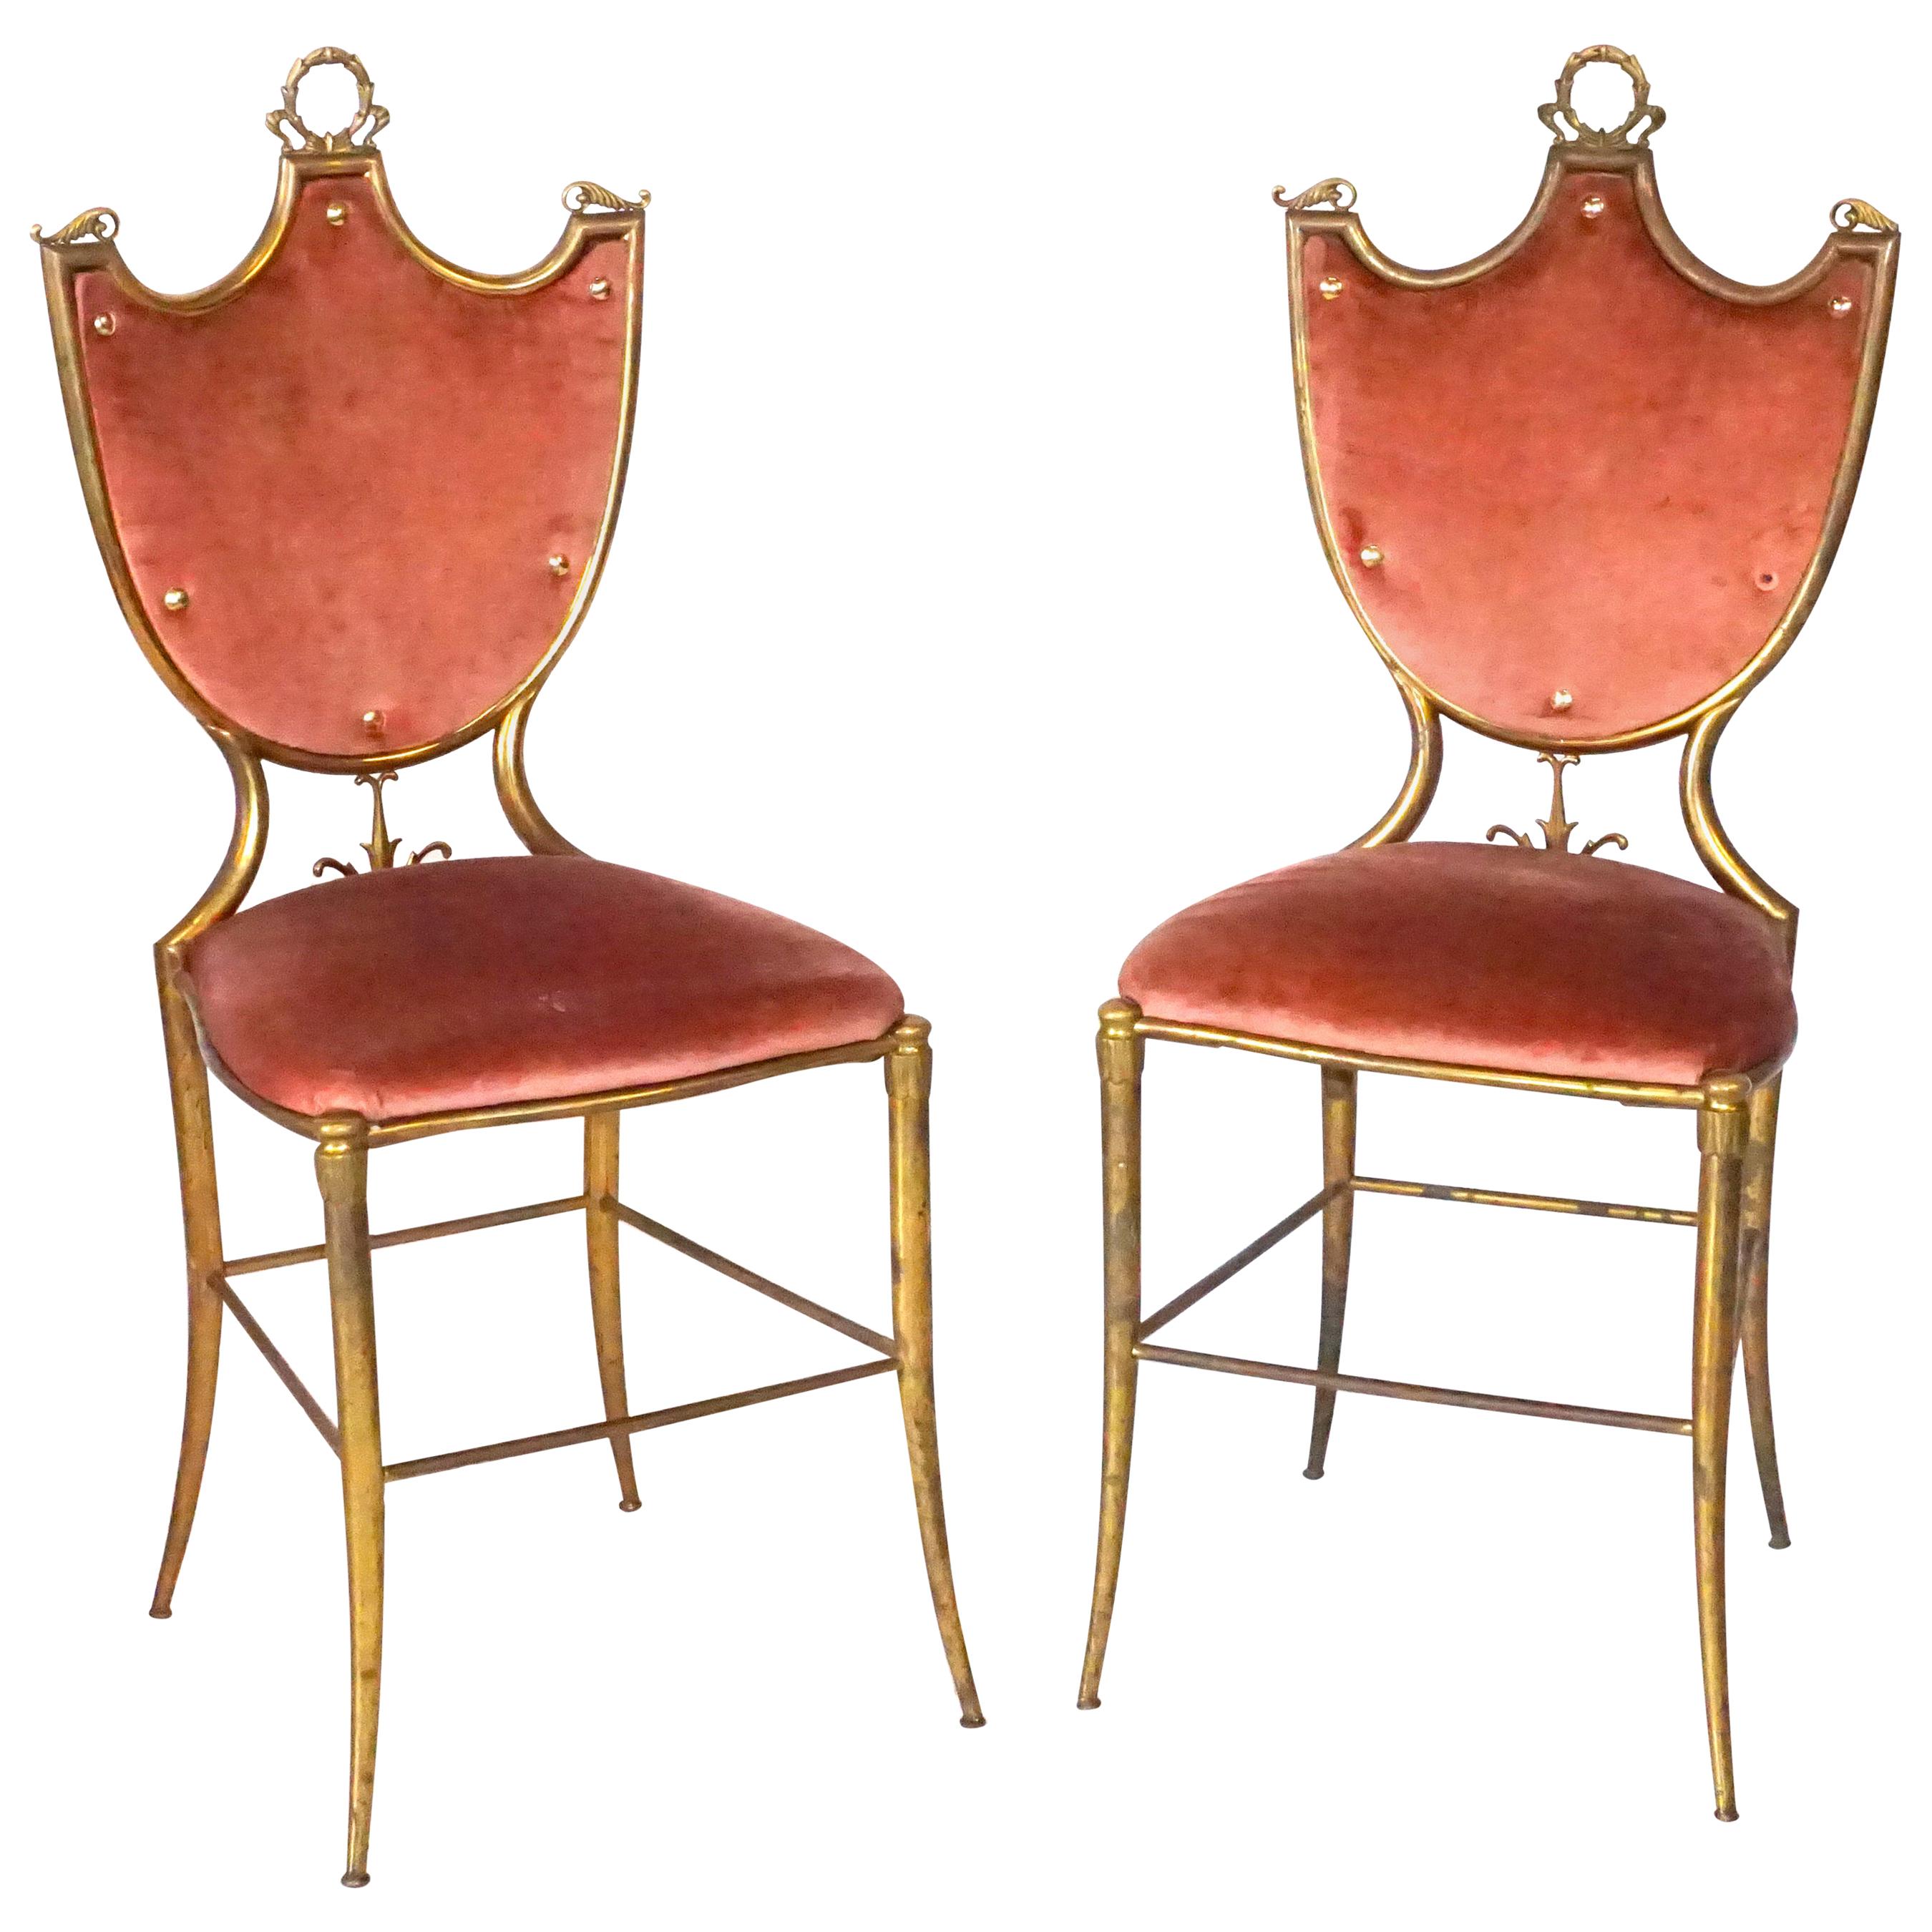 20th Century Pair of Italian Neoclassical Style Bronze Side Chairs